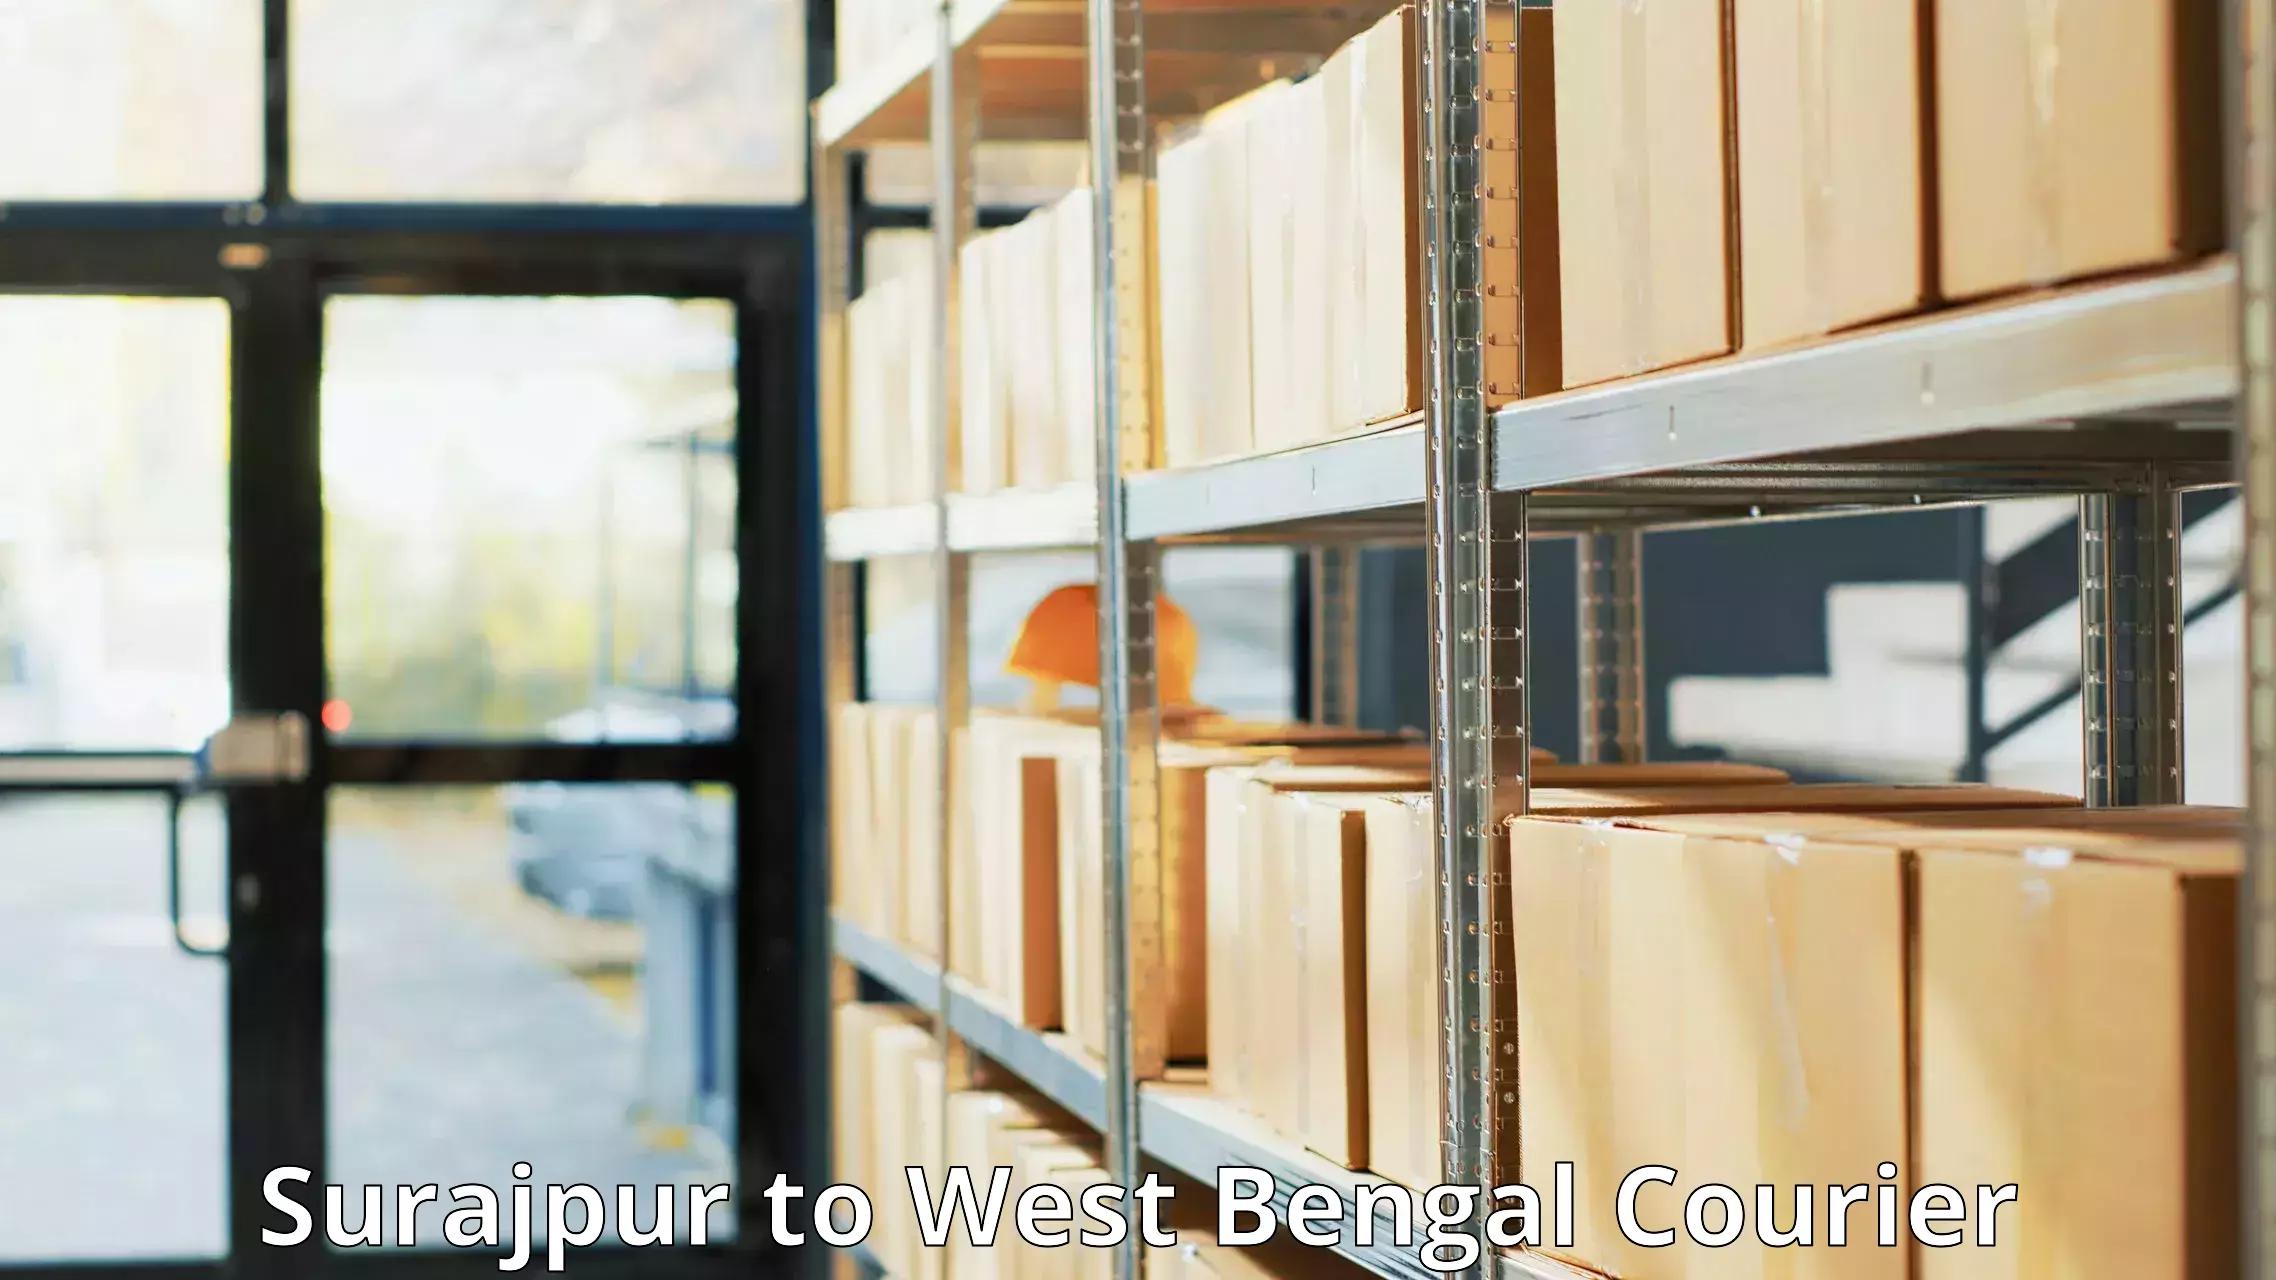 Subscription-based courier Surajpur to Kolkata Port